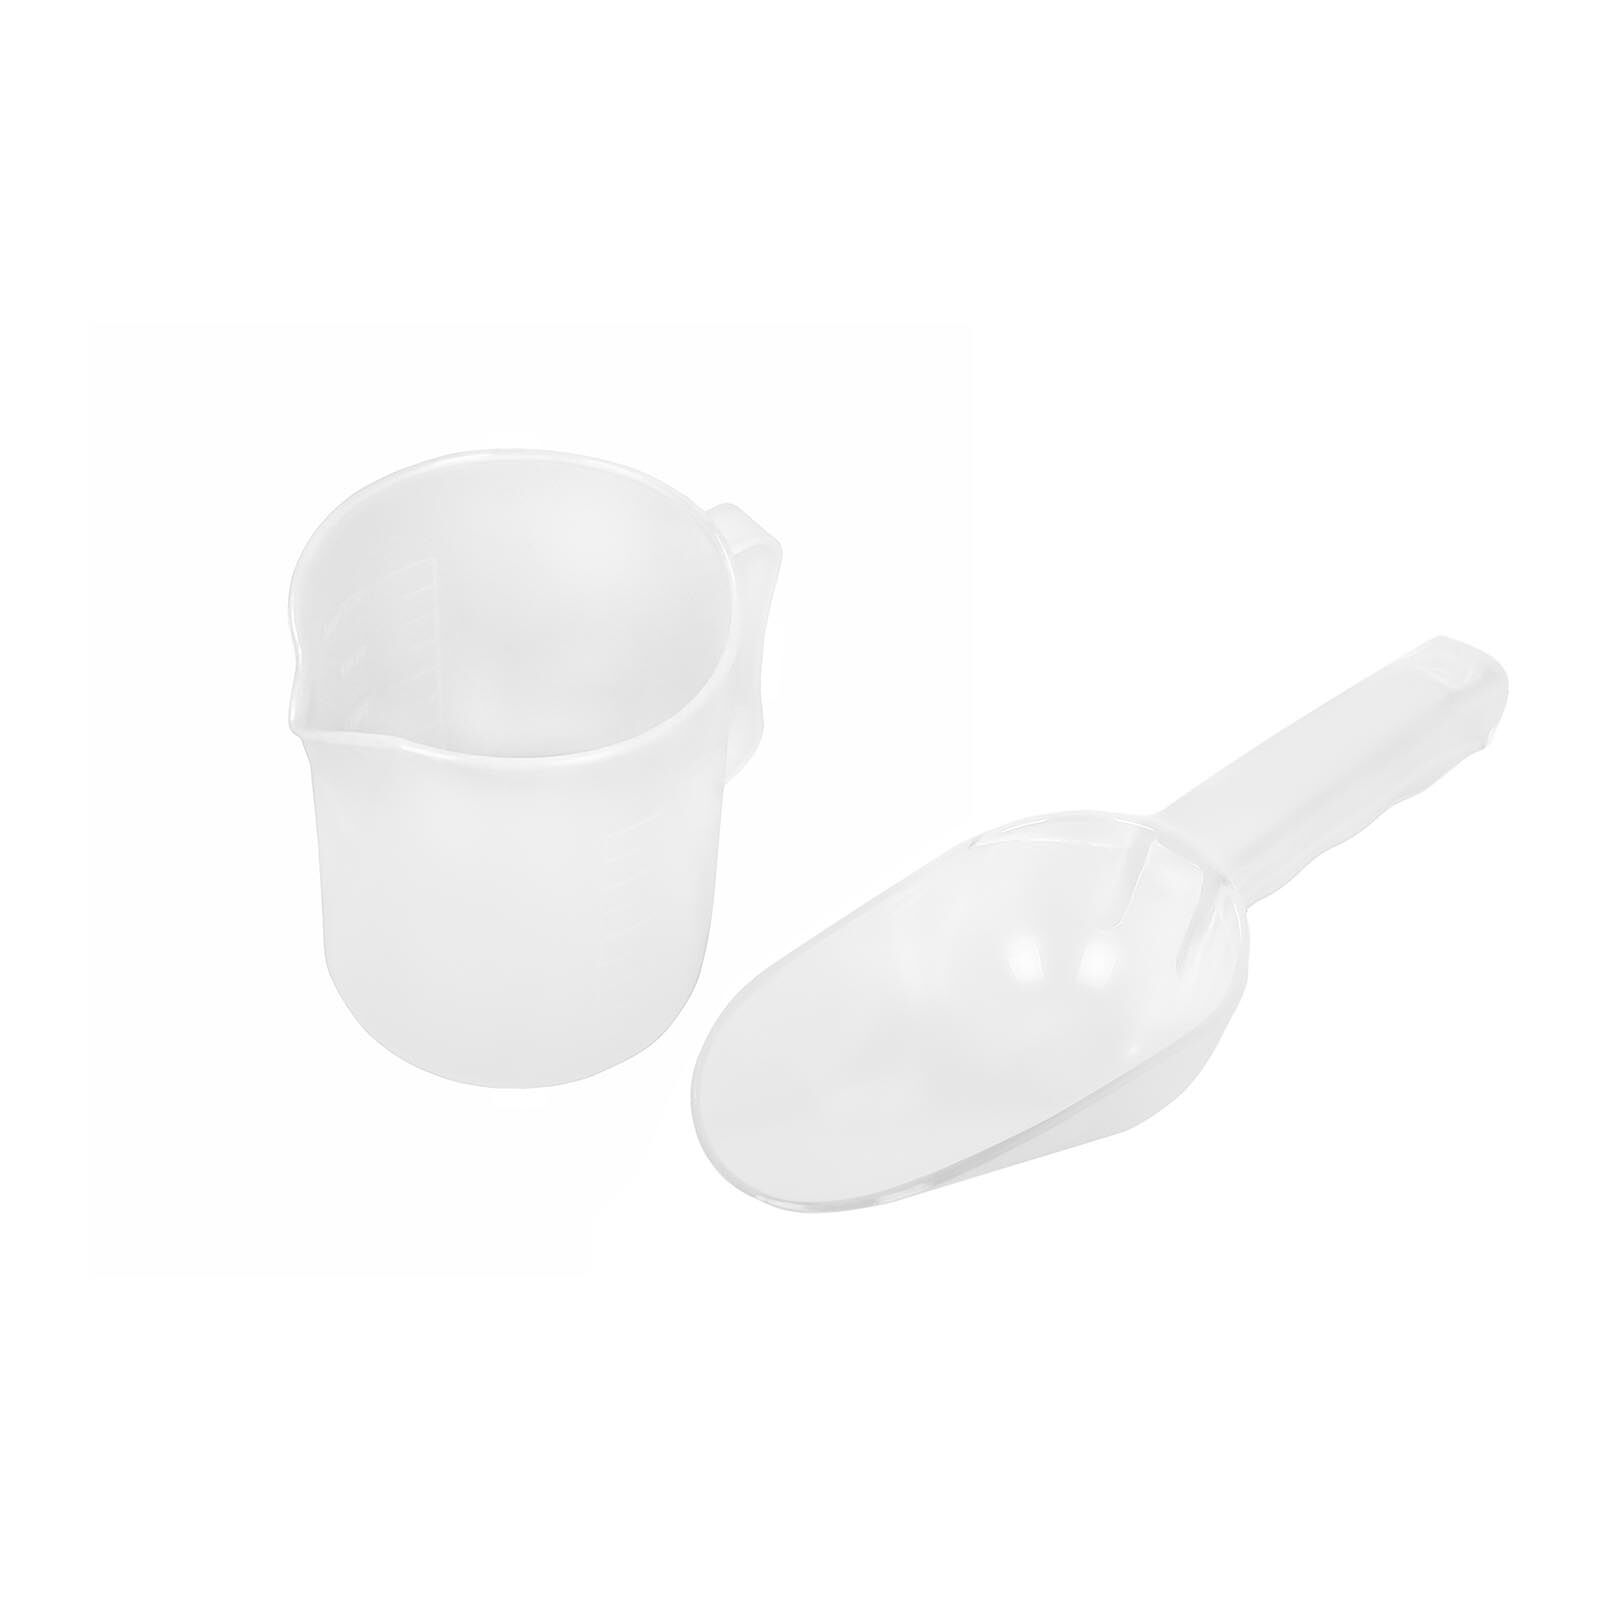 Royal Catering Popcorn Shovel and Measuring Cup RCPZ